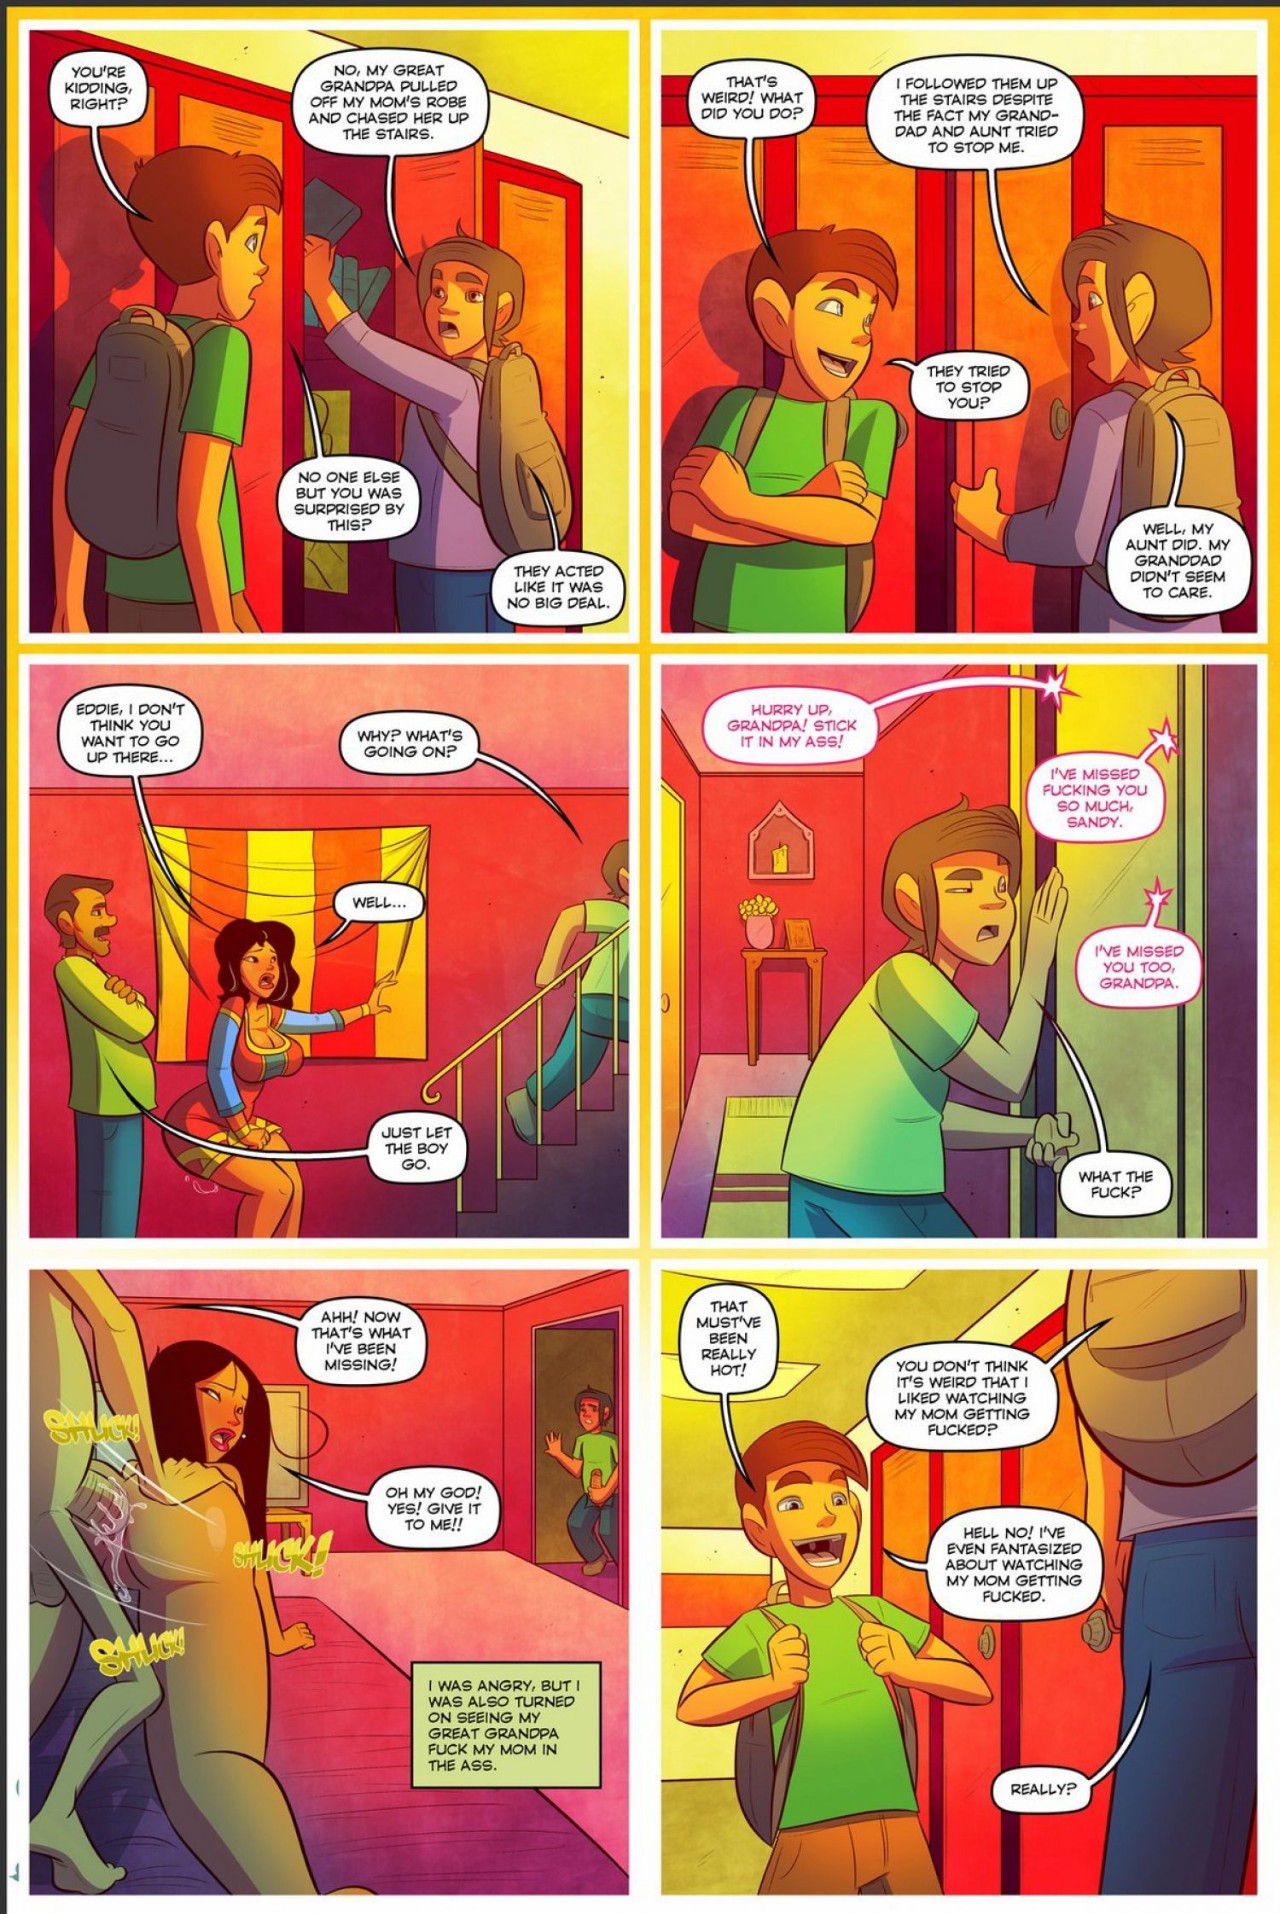 Keeping It Up With The Joneses Part 3 Porn Comic english 11